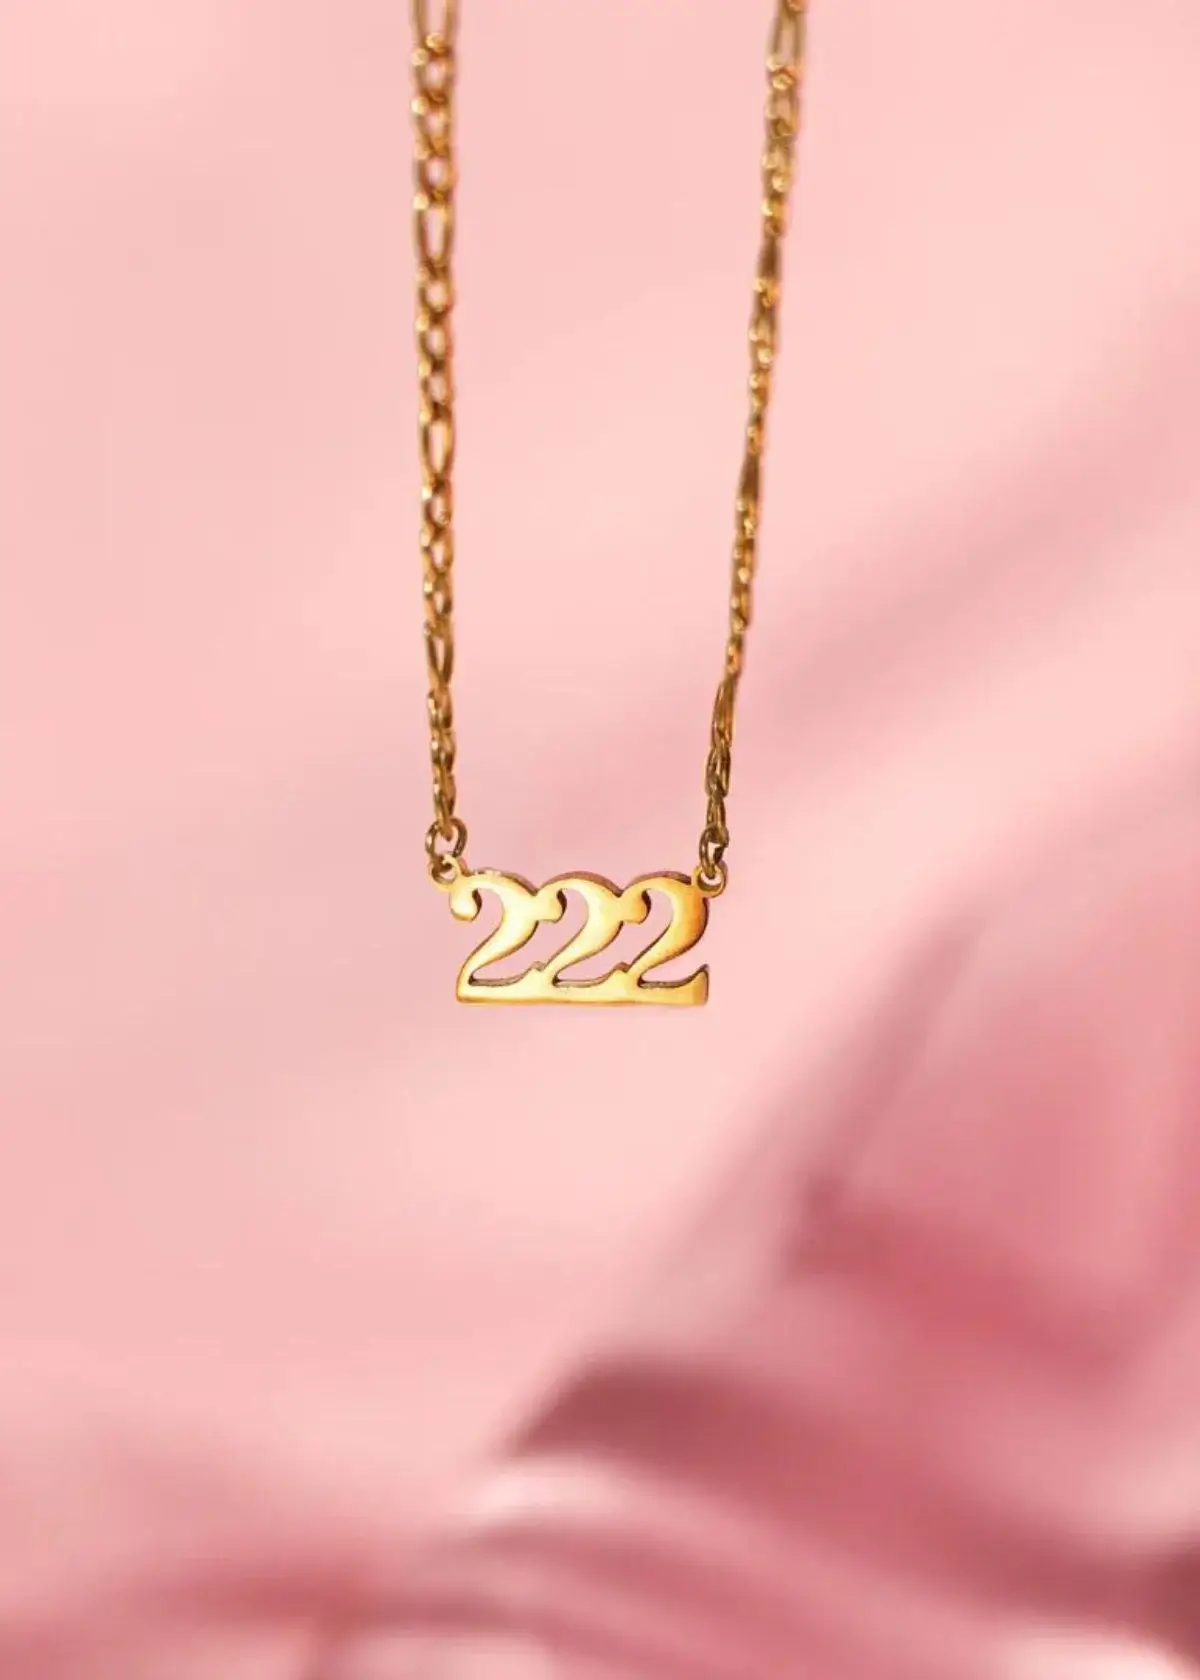 What does a 222 necklace symbolize?